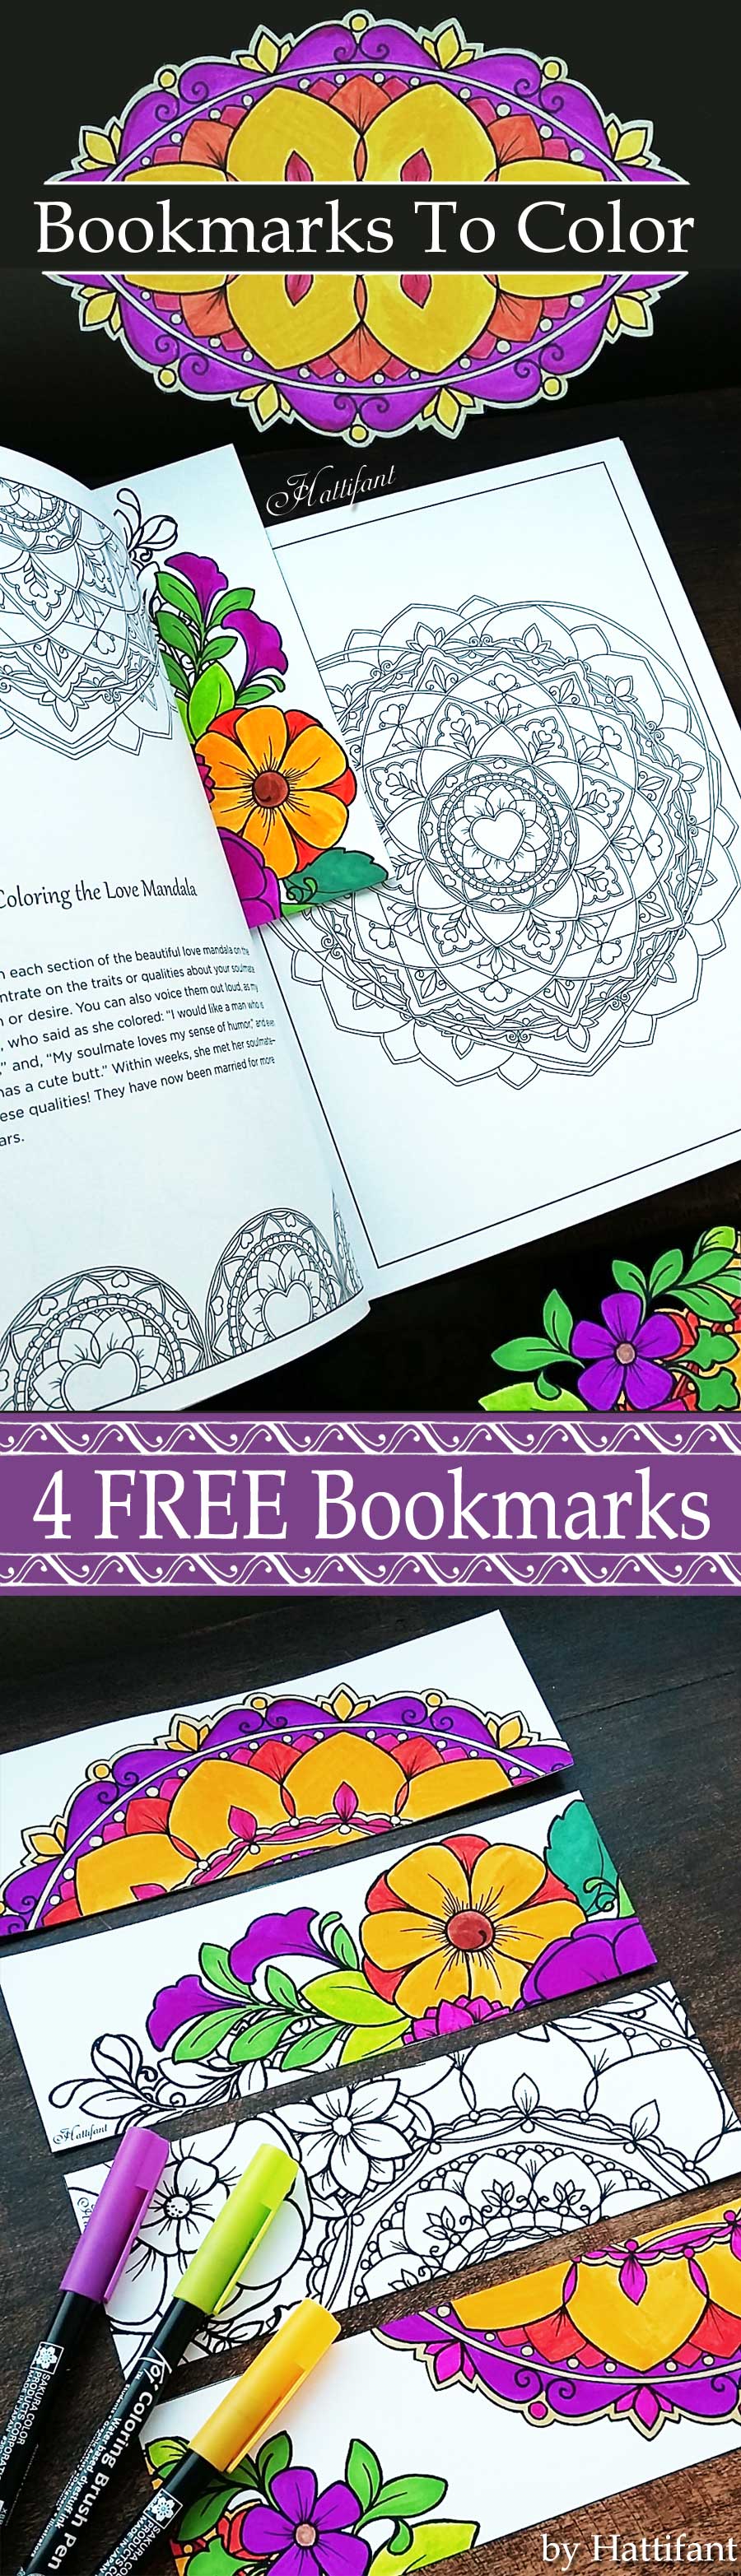 Hattifant's Flower and Mandala Bookmarks to color free printable coloring page